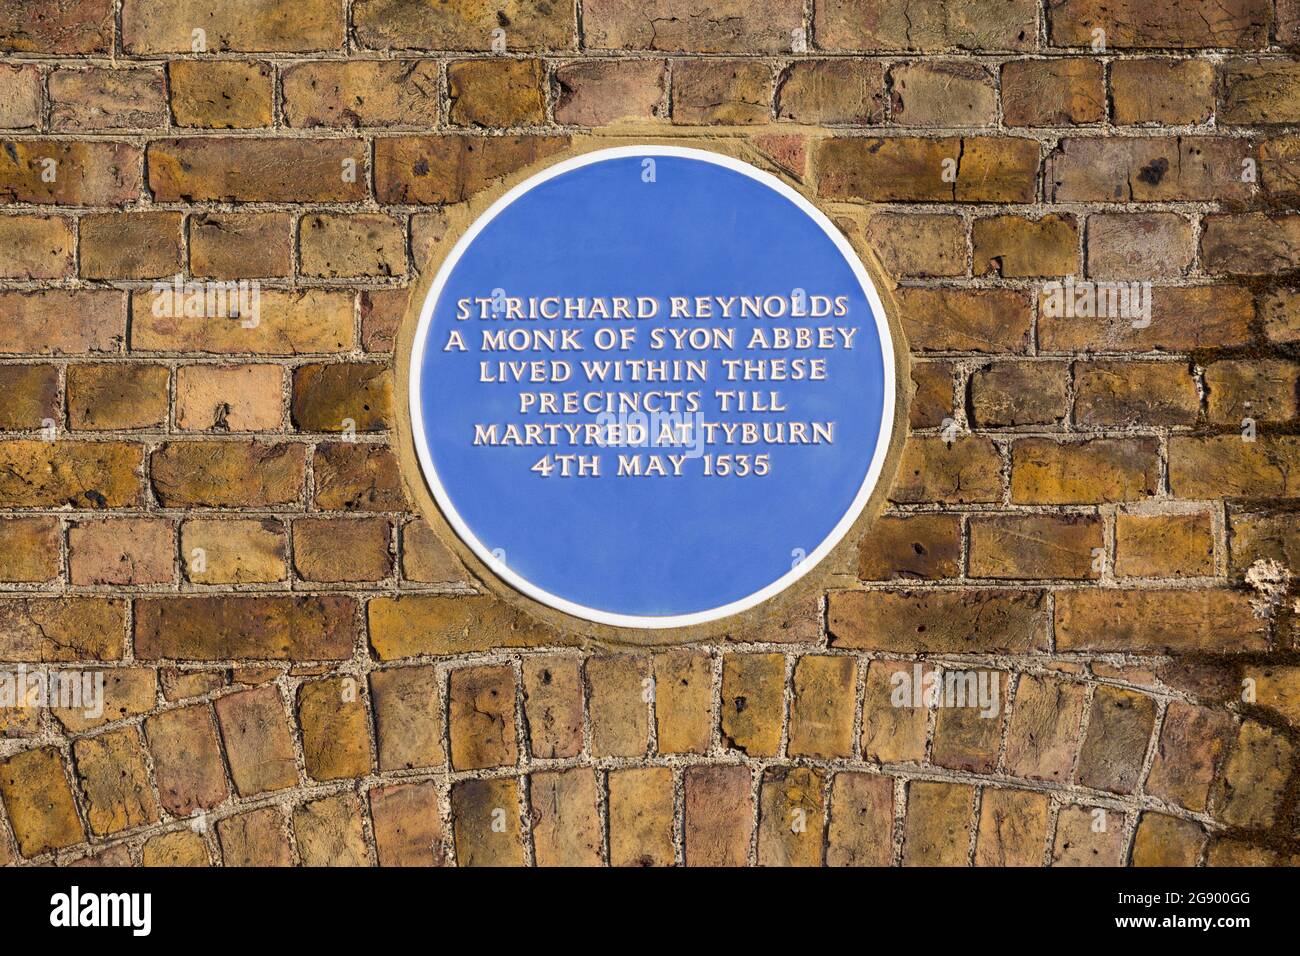 Saint Richard Reynolds blue plaque. Memorial plaque to mark the home – the former Syon Abbey – of the Catholic martyr. UK (127) Stock Photo